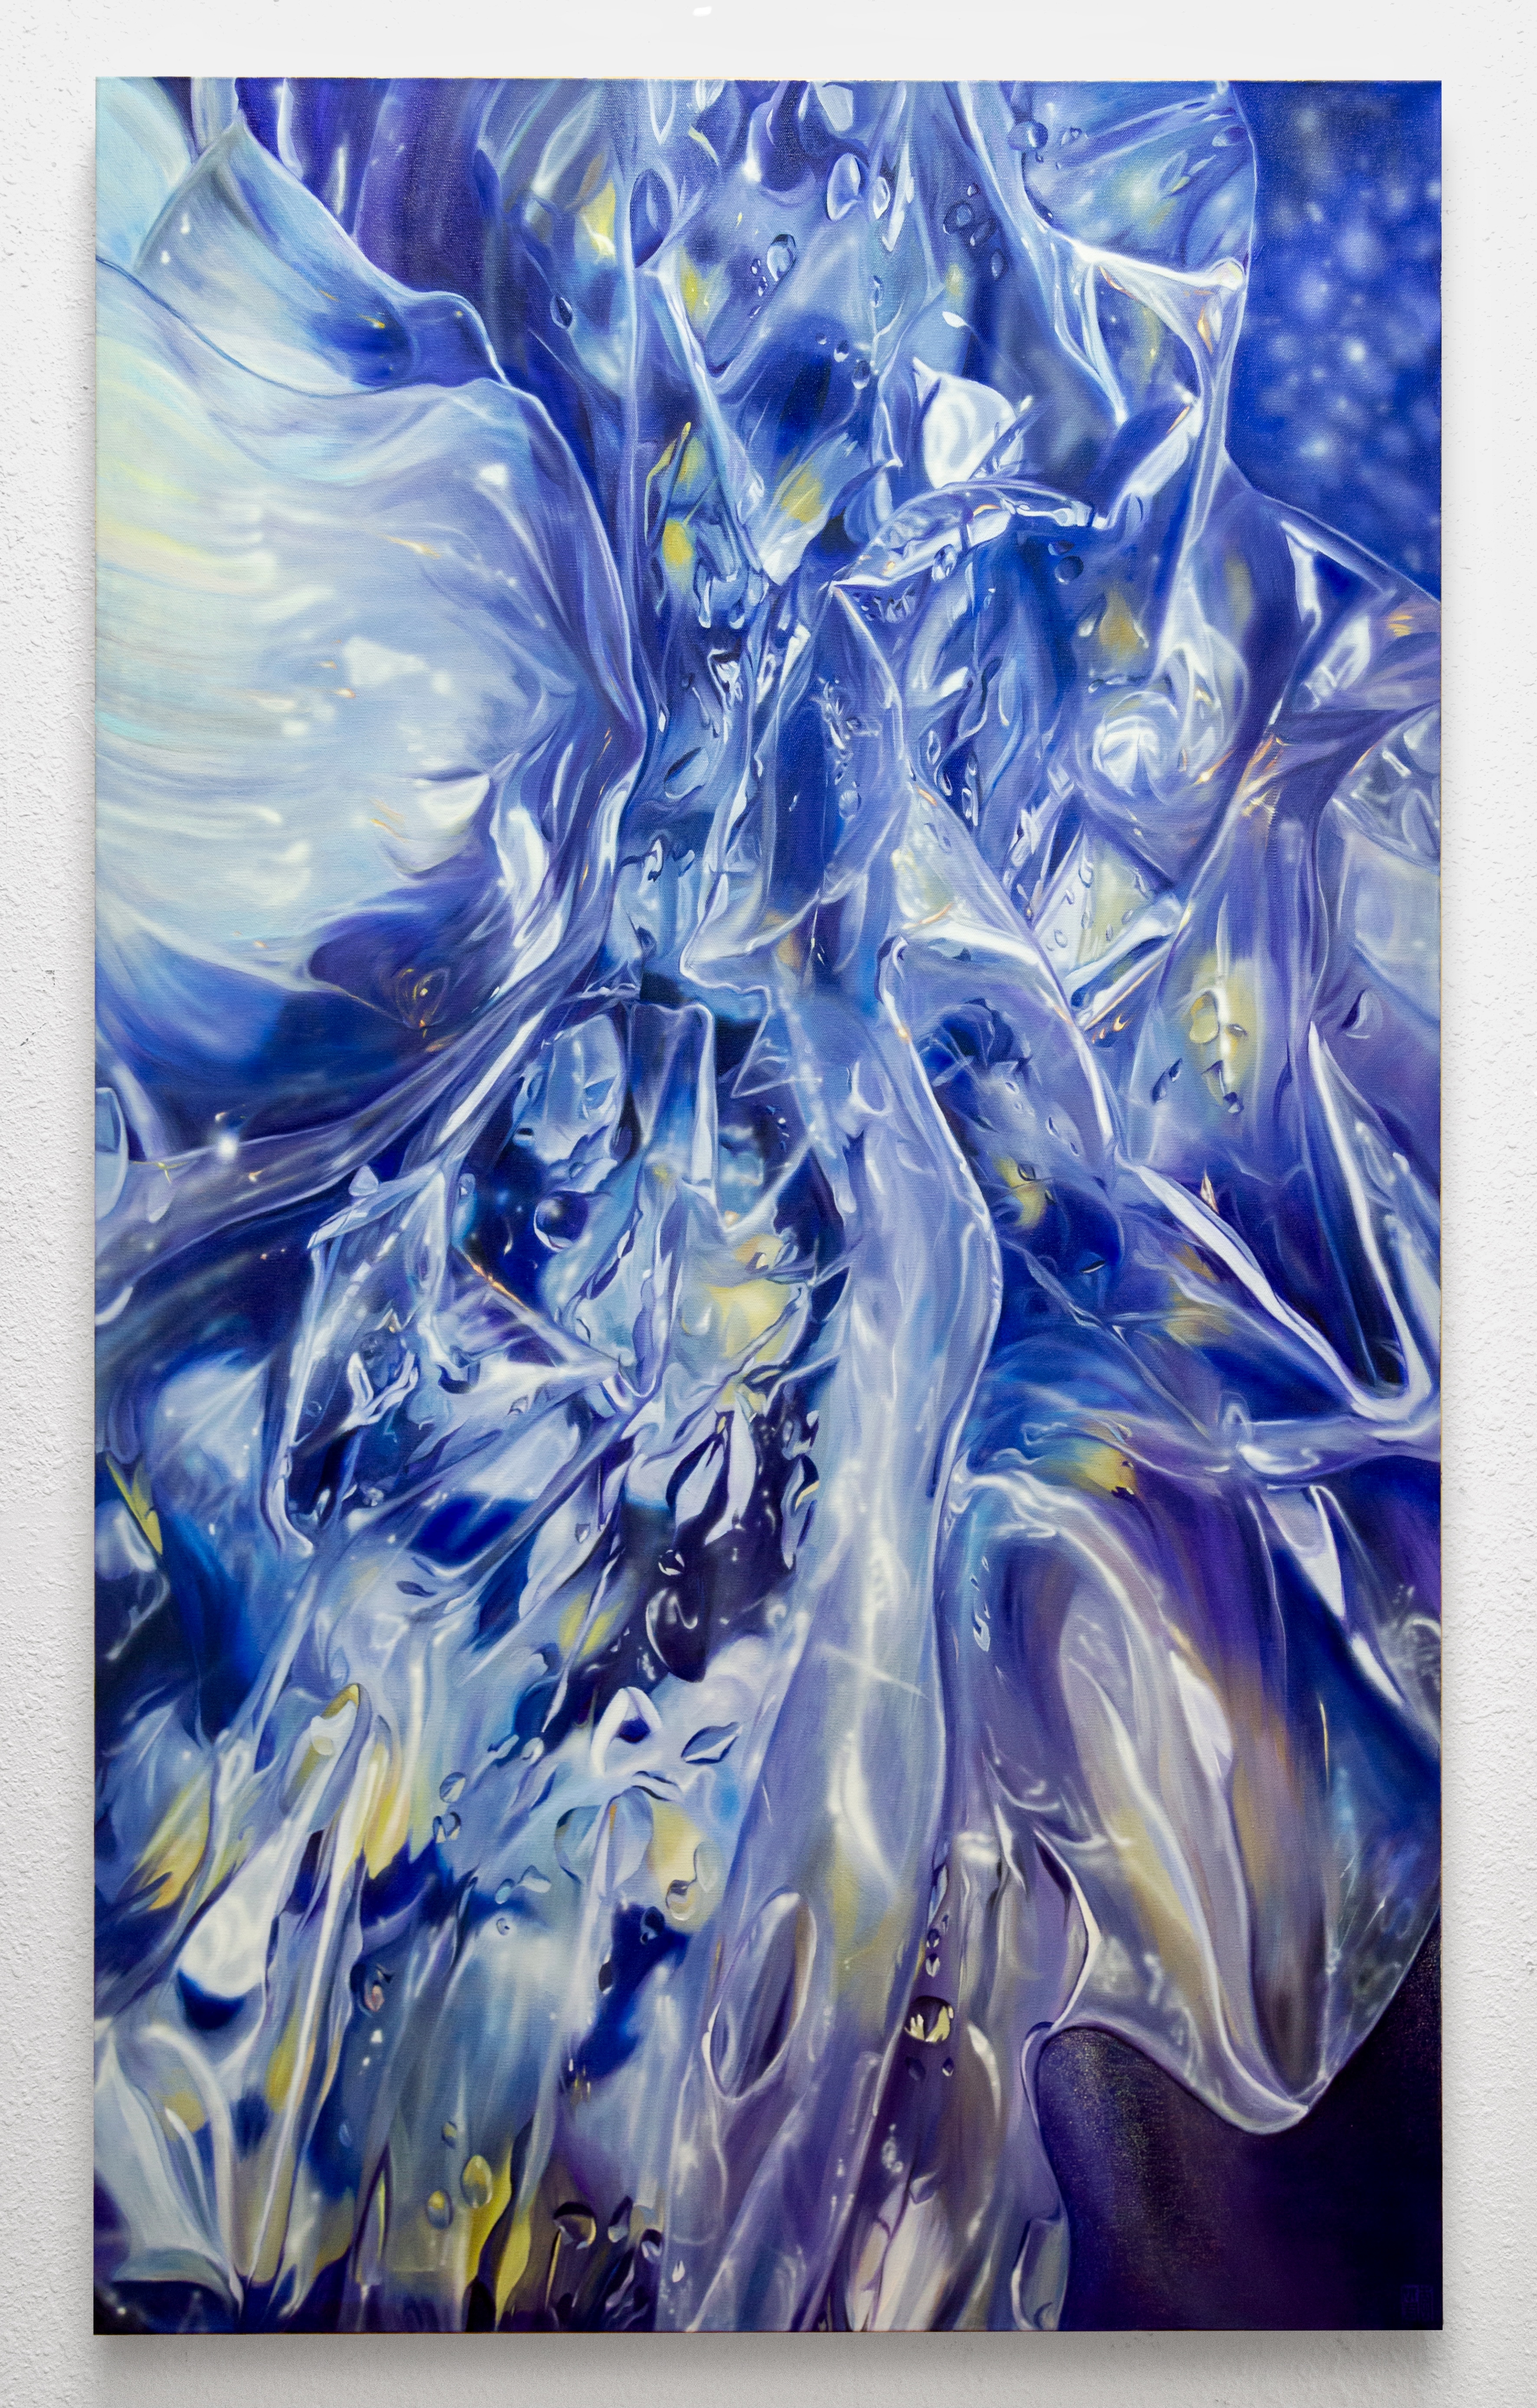 Passenger, 2022, 36x60 inches, oil on canvas